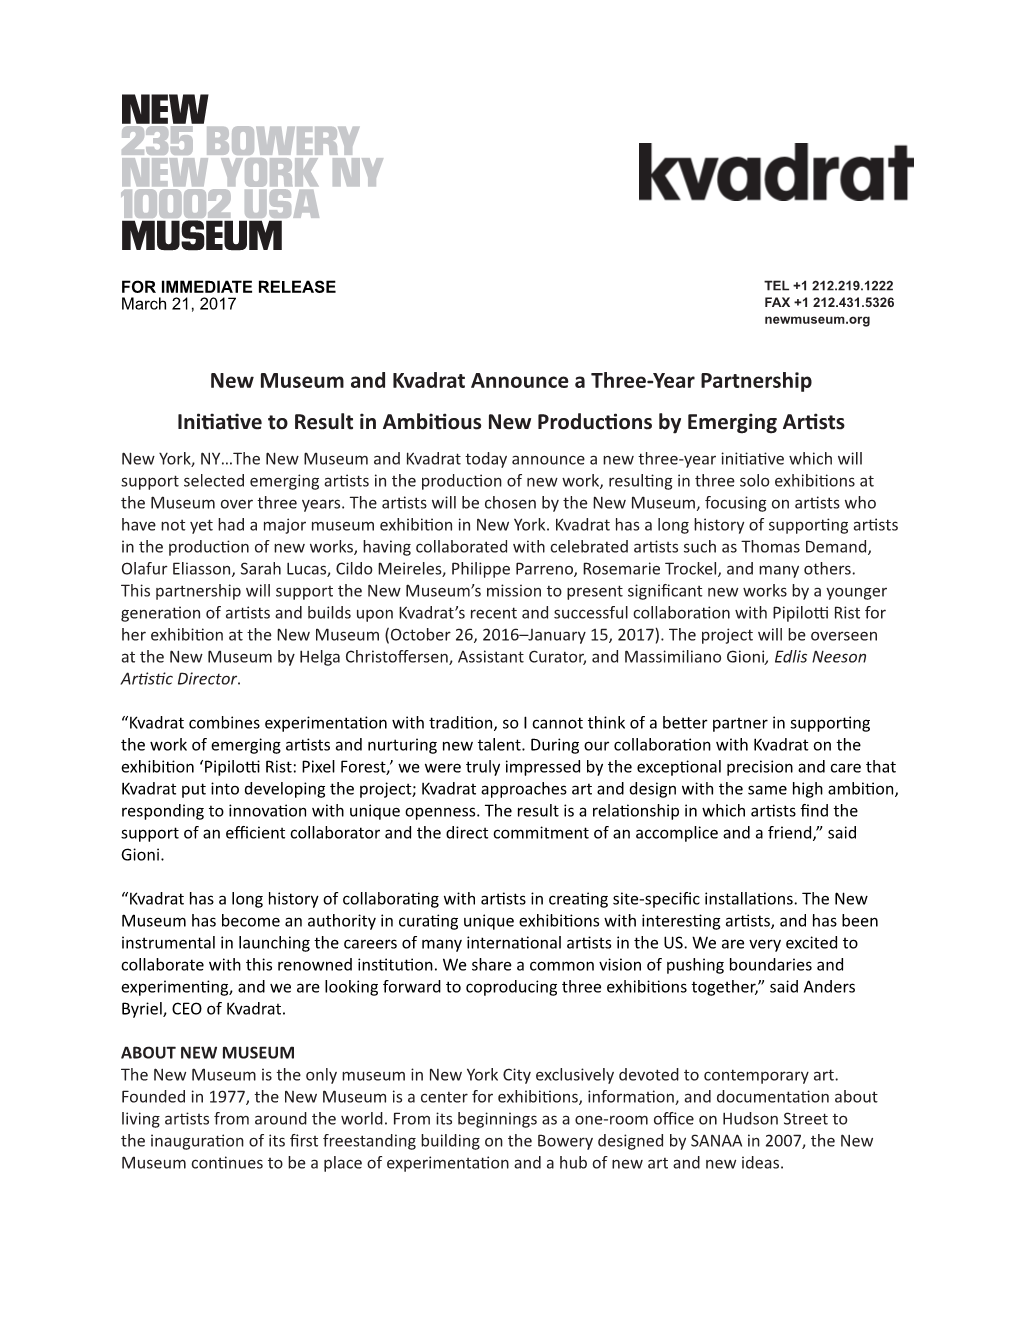 New Museum and Kvadrat Announce a Three-Year Partnership Initiative